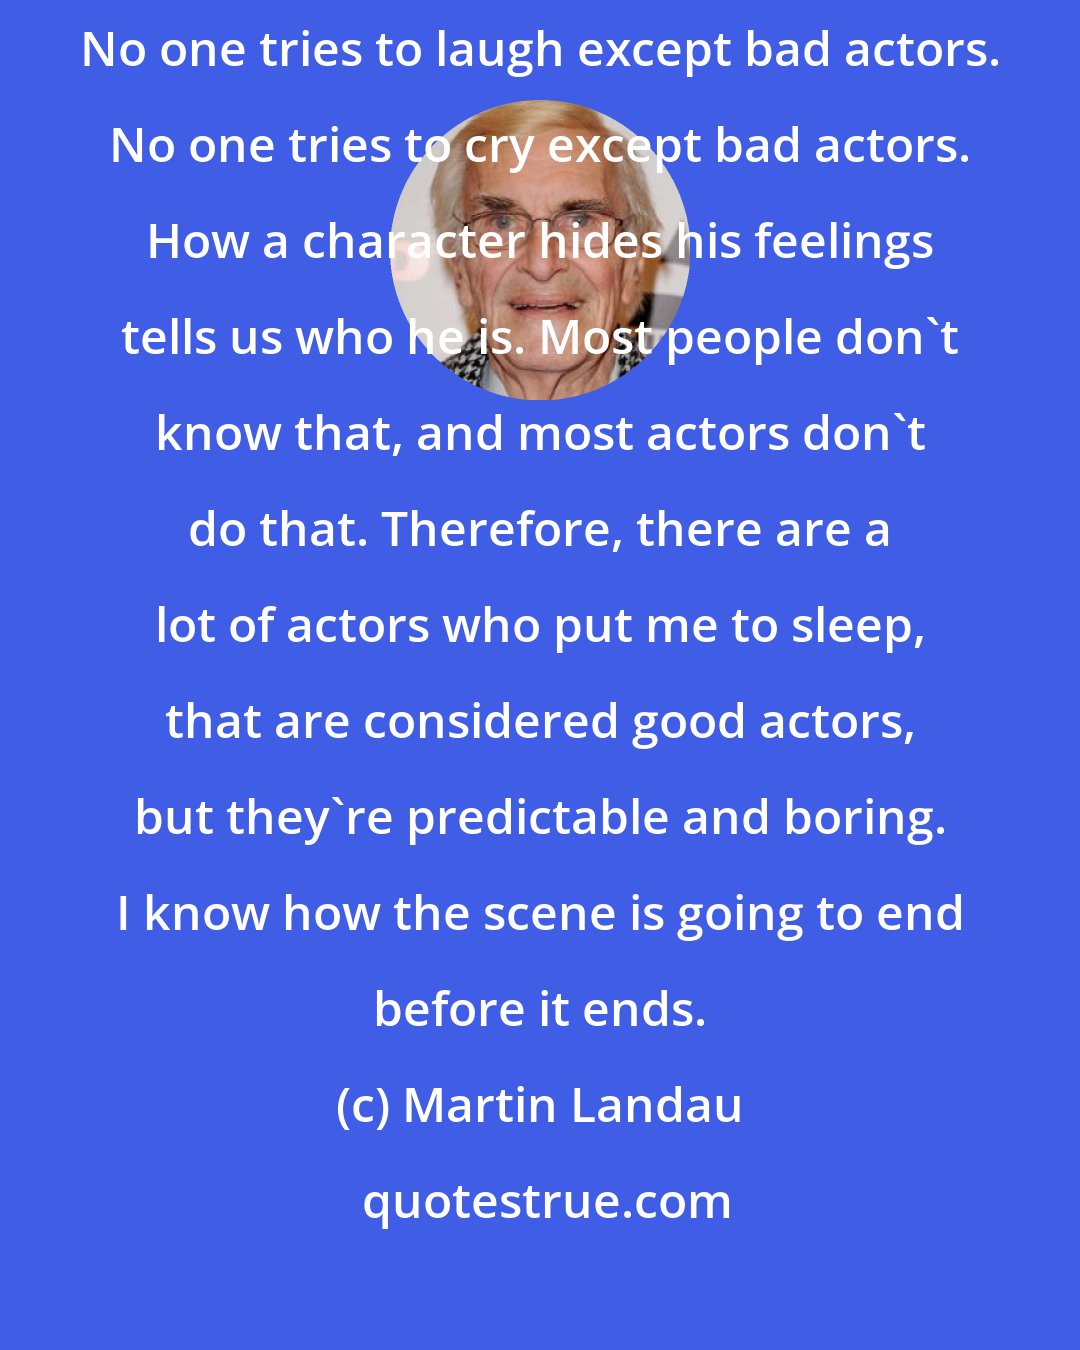 Martin Landau: The actor has to have some degree of craft, along with the talent. No one tries to laugh except bad actors. No one tries to cry except bad actors. How a character hides his feelings tells us who he is. Most people don't know that, and most actors don't do that. Therefore, there are a lot of actors who put me to sleep, that are considered good actors, but they're predictable and boring. I know how the scene is going to end before it ends.